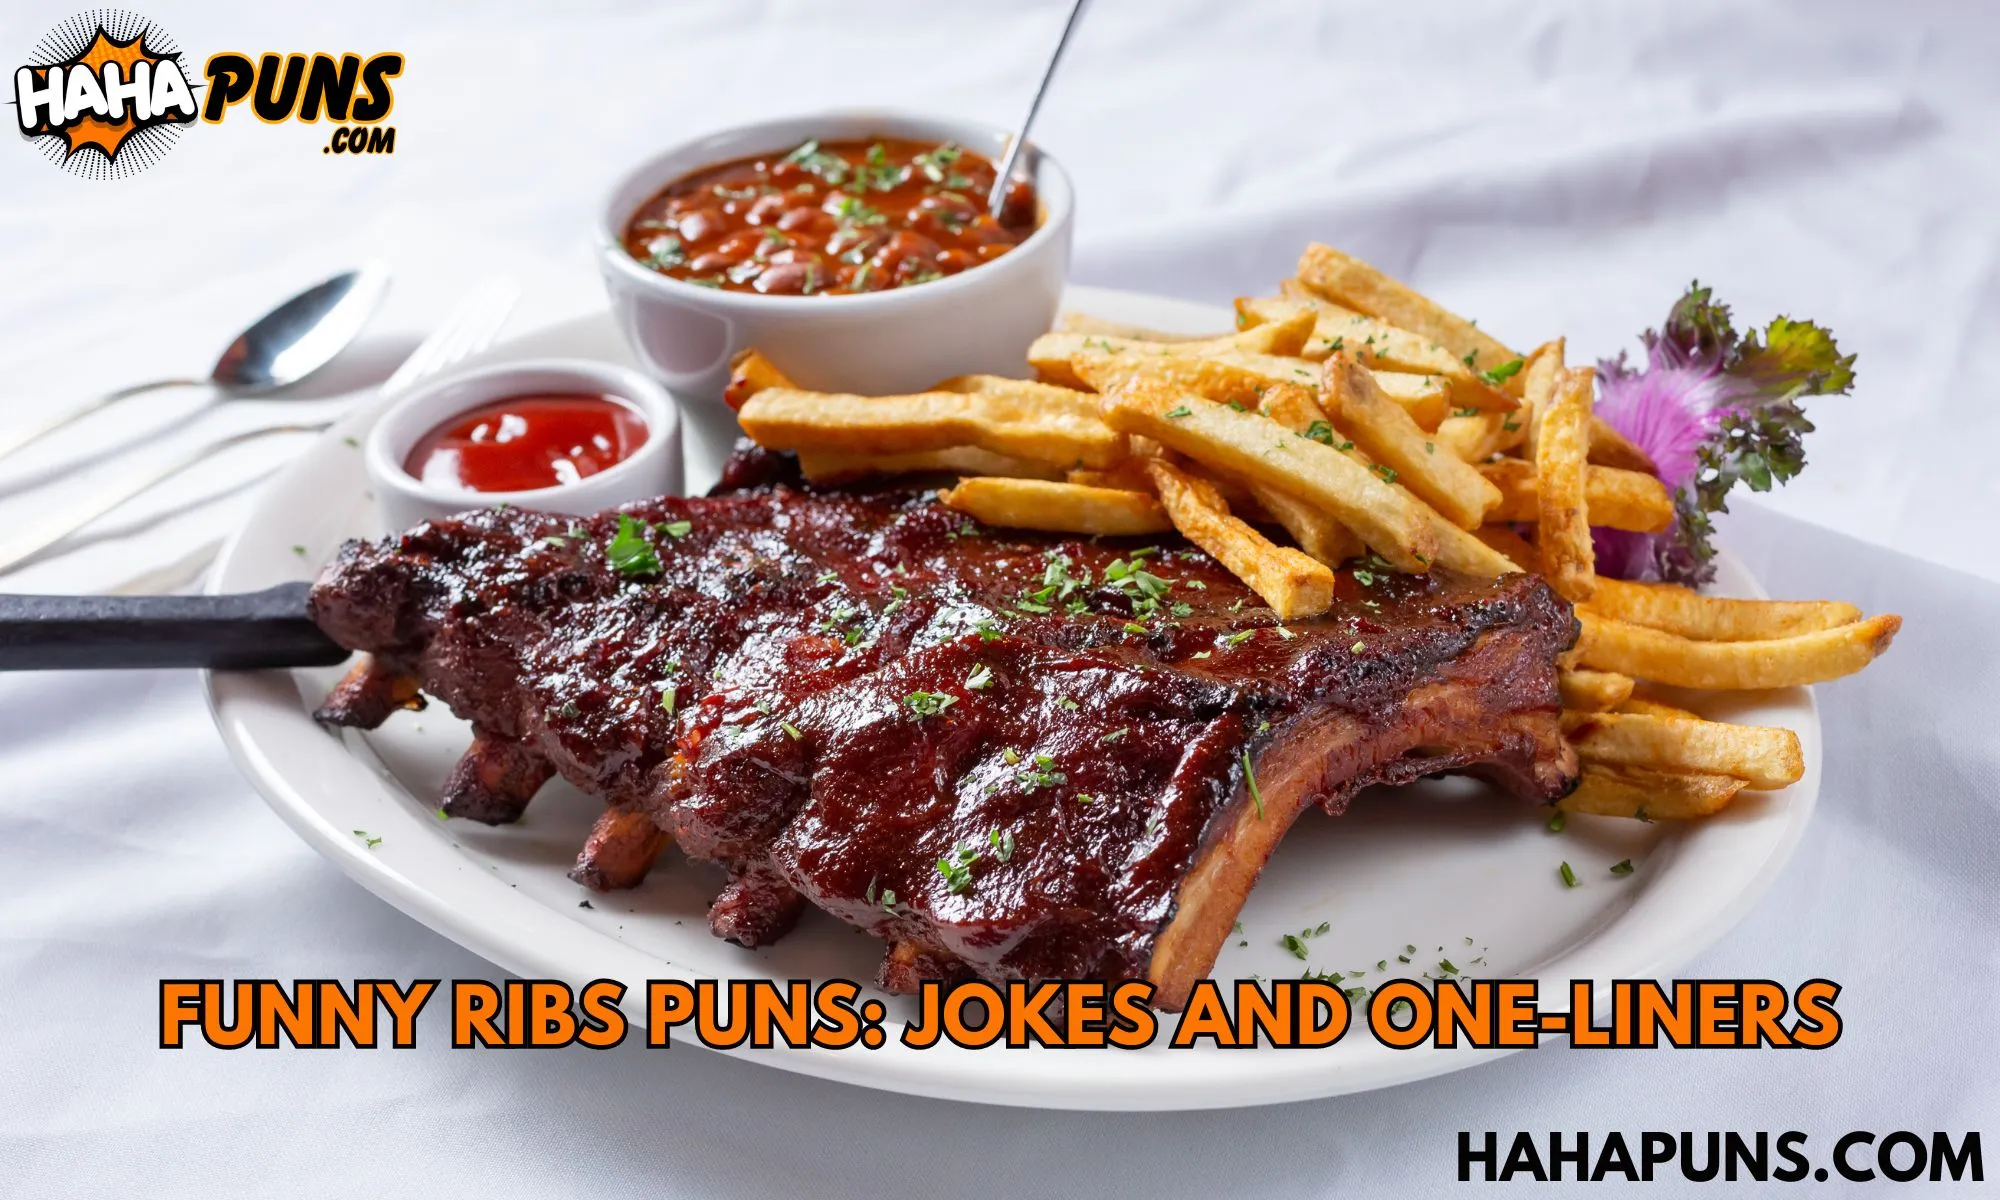 Funny Ribs Puns: Jokes And One-Liners